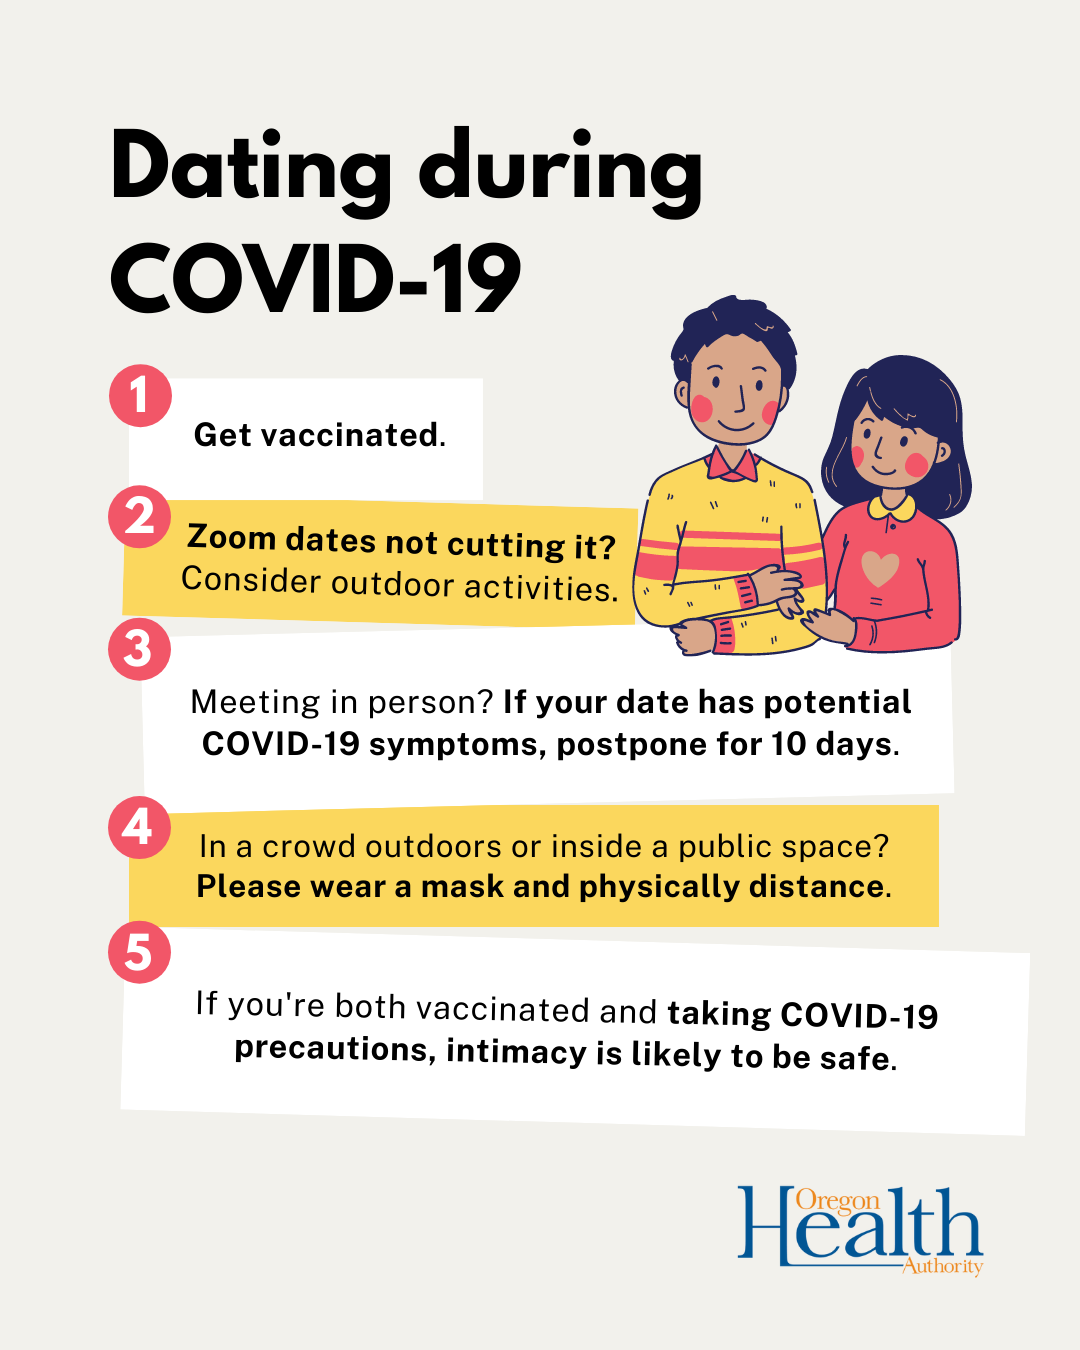 Image shows a young adult couple on a date. Graphic provides tips for taking extra dating precautions during COVID-19.